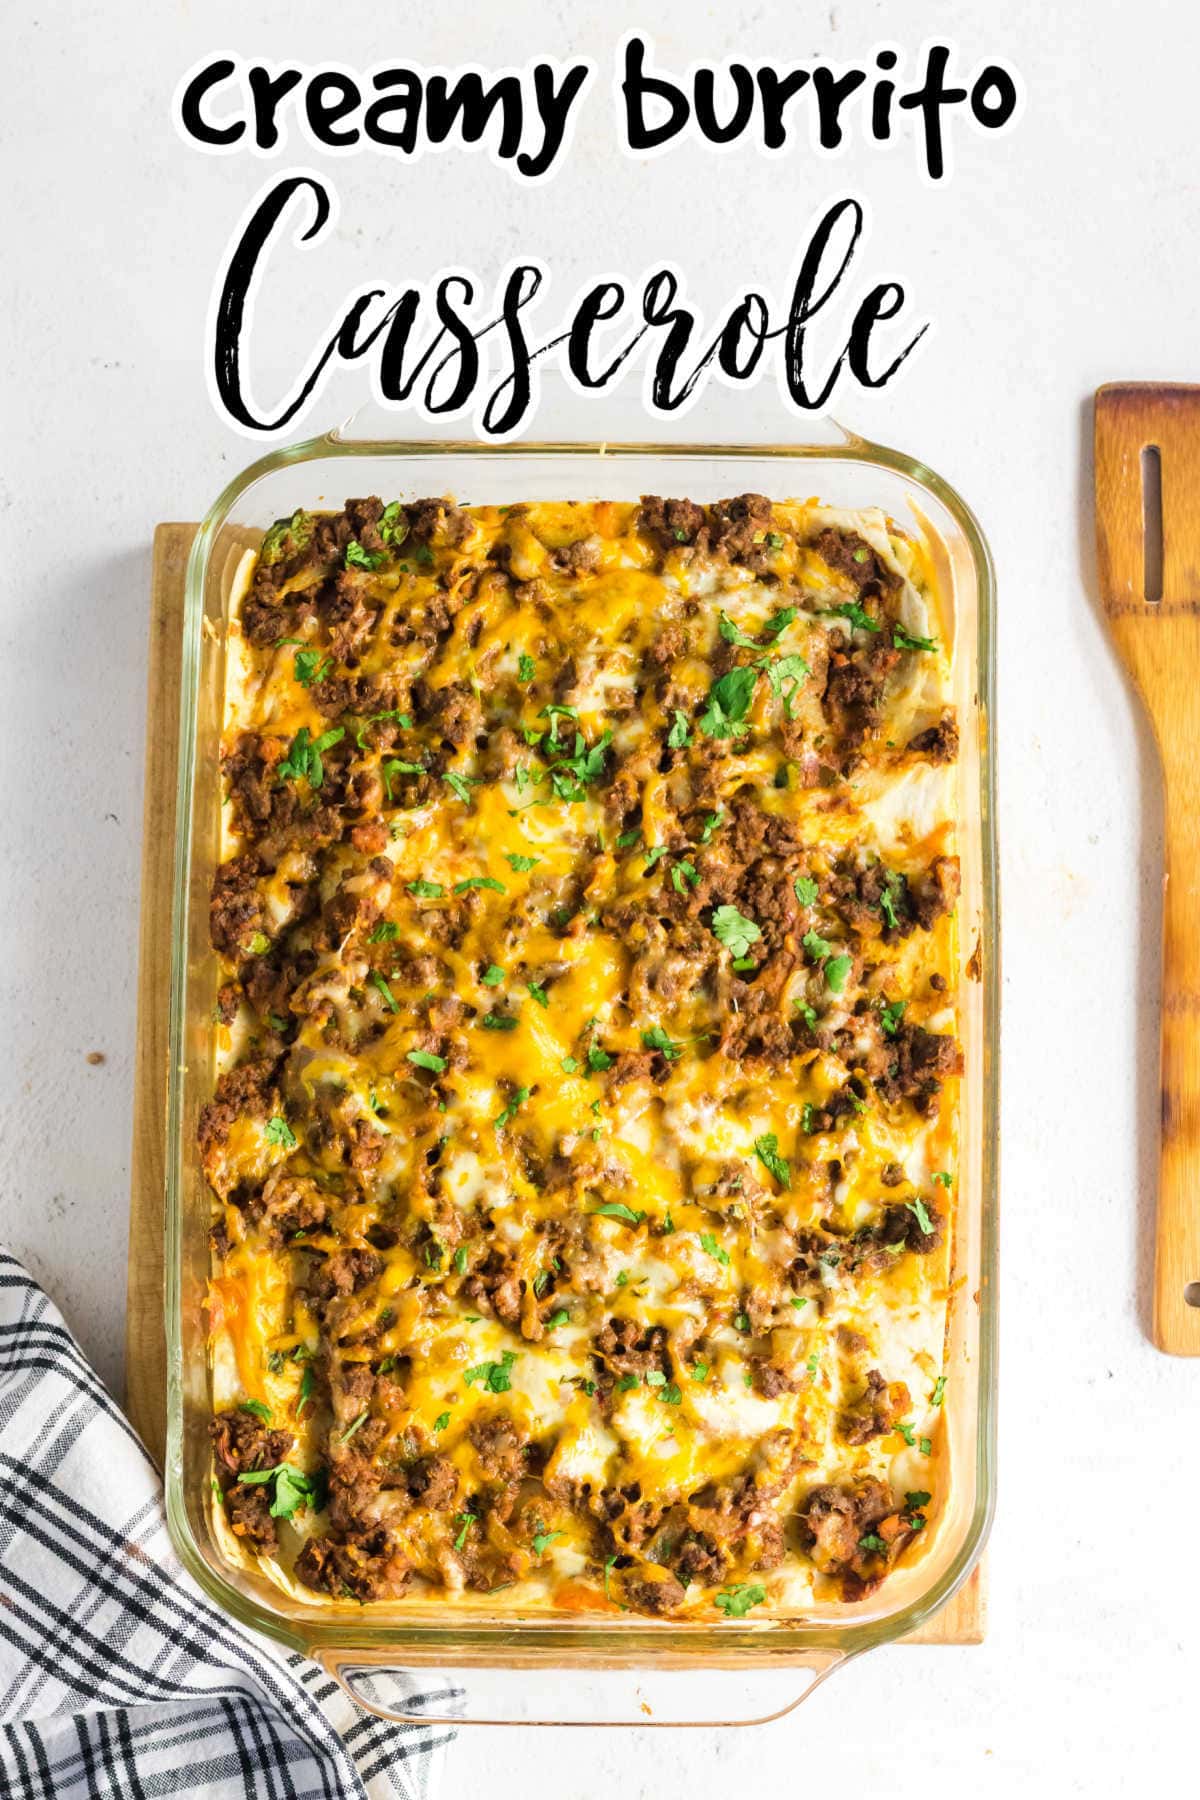 Overhead view of casserole with title text overlay.